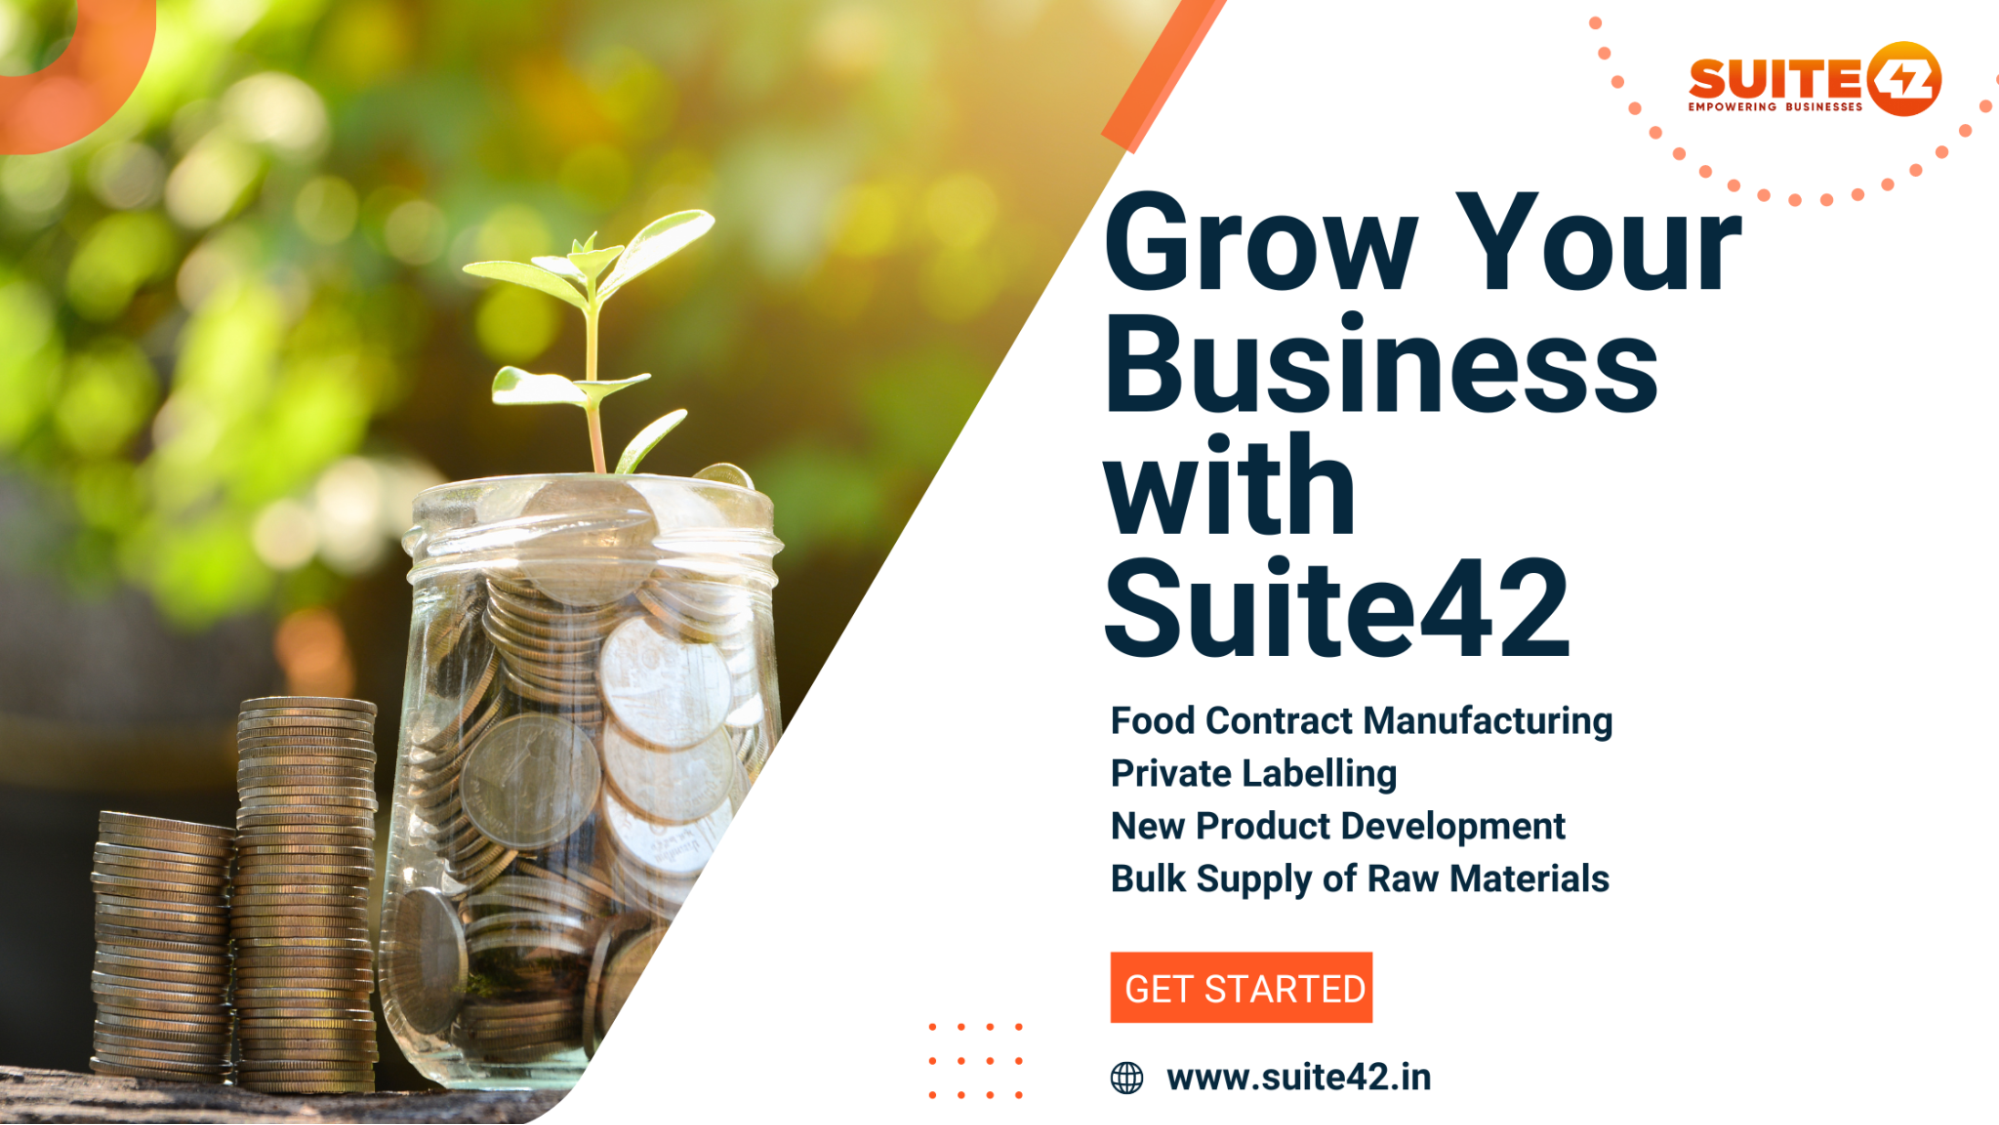 Suite42 is a reliable coffee Contract Manufacturer and private label service provider